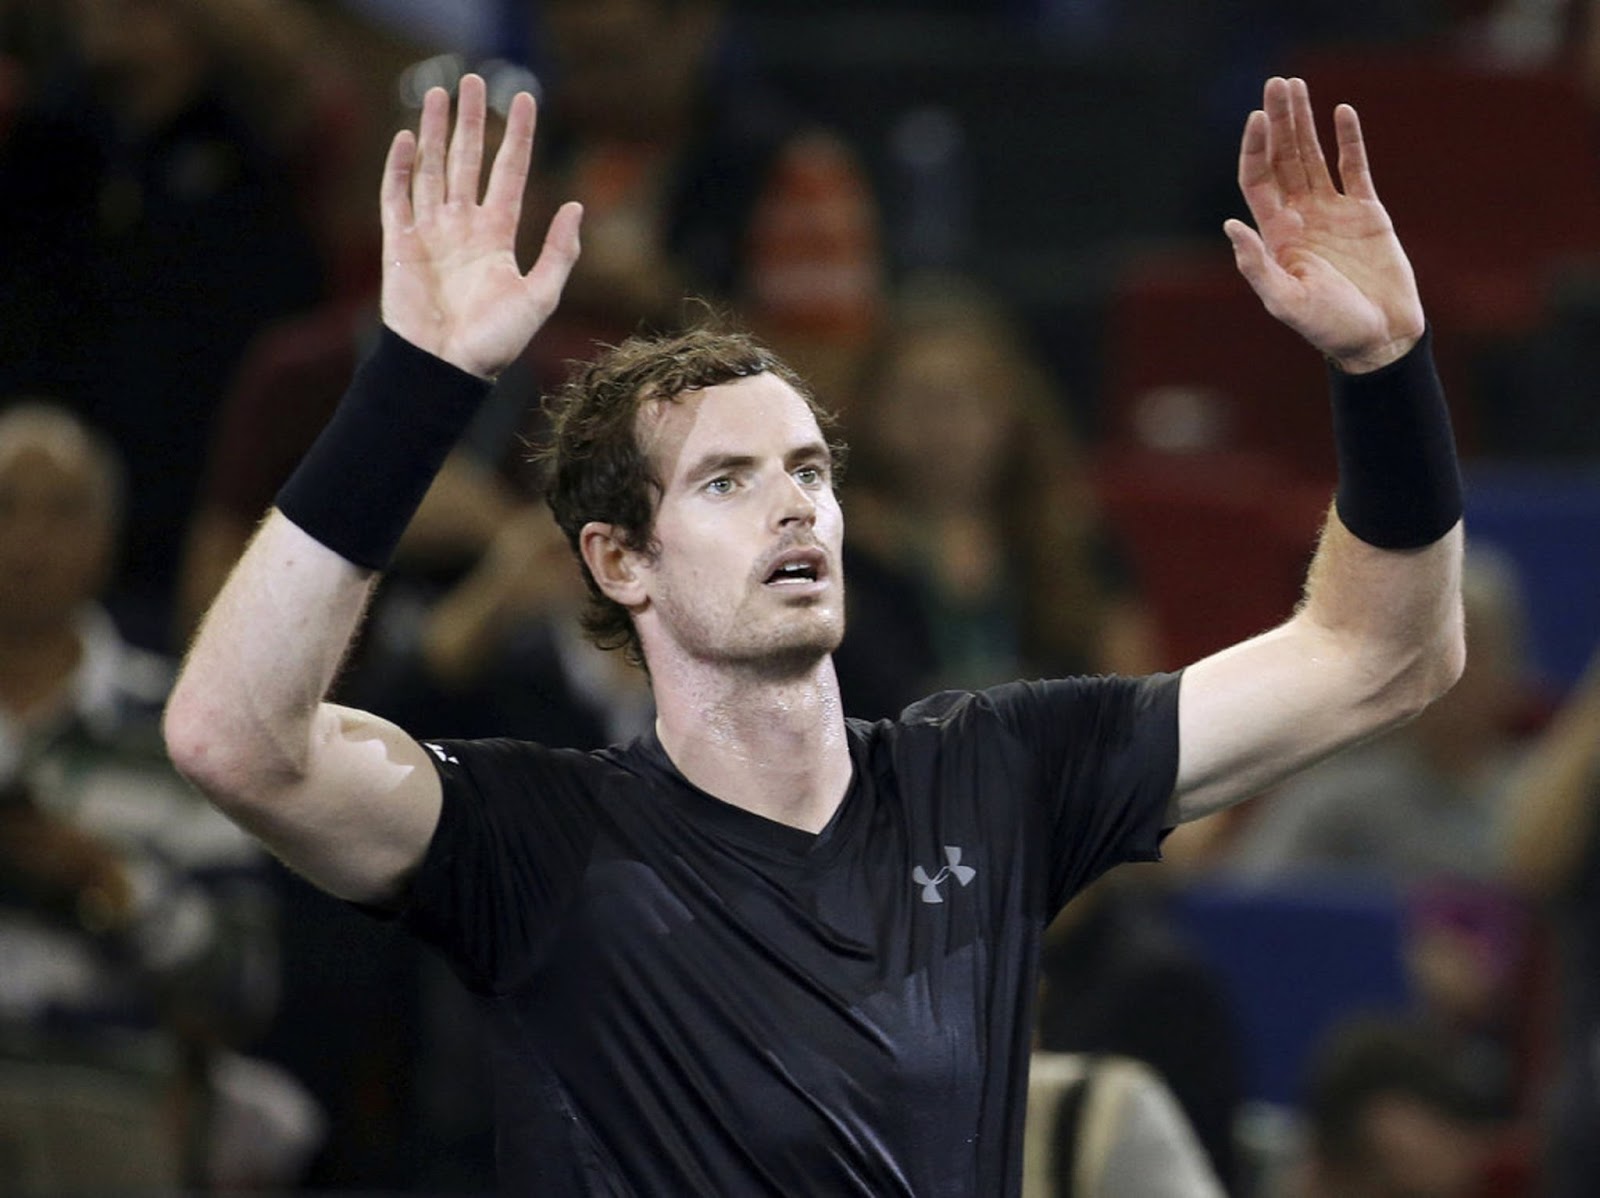 ANDY MURRAY 6